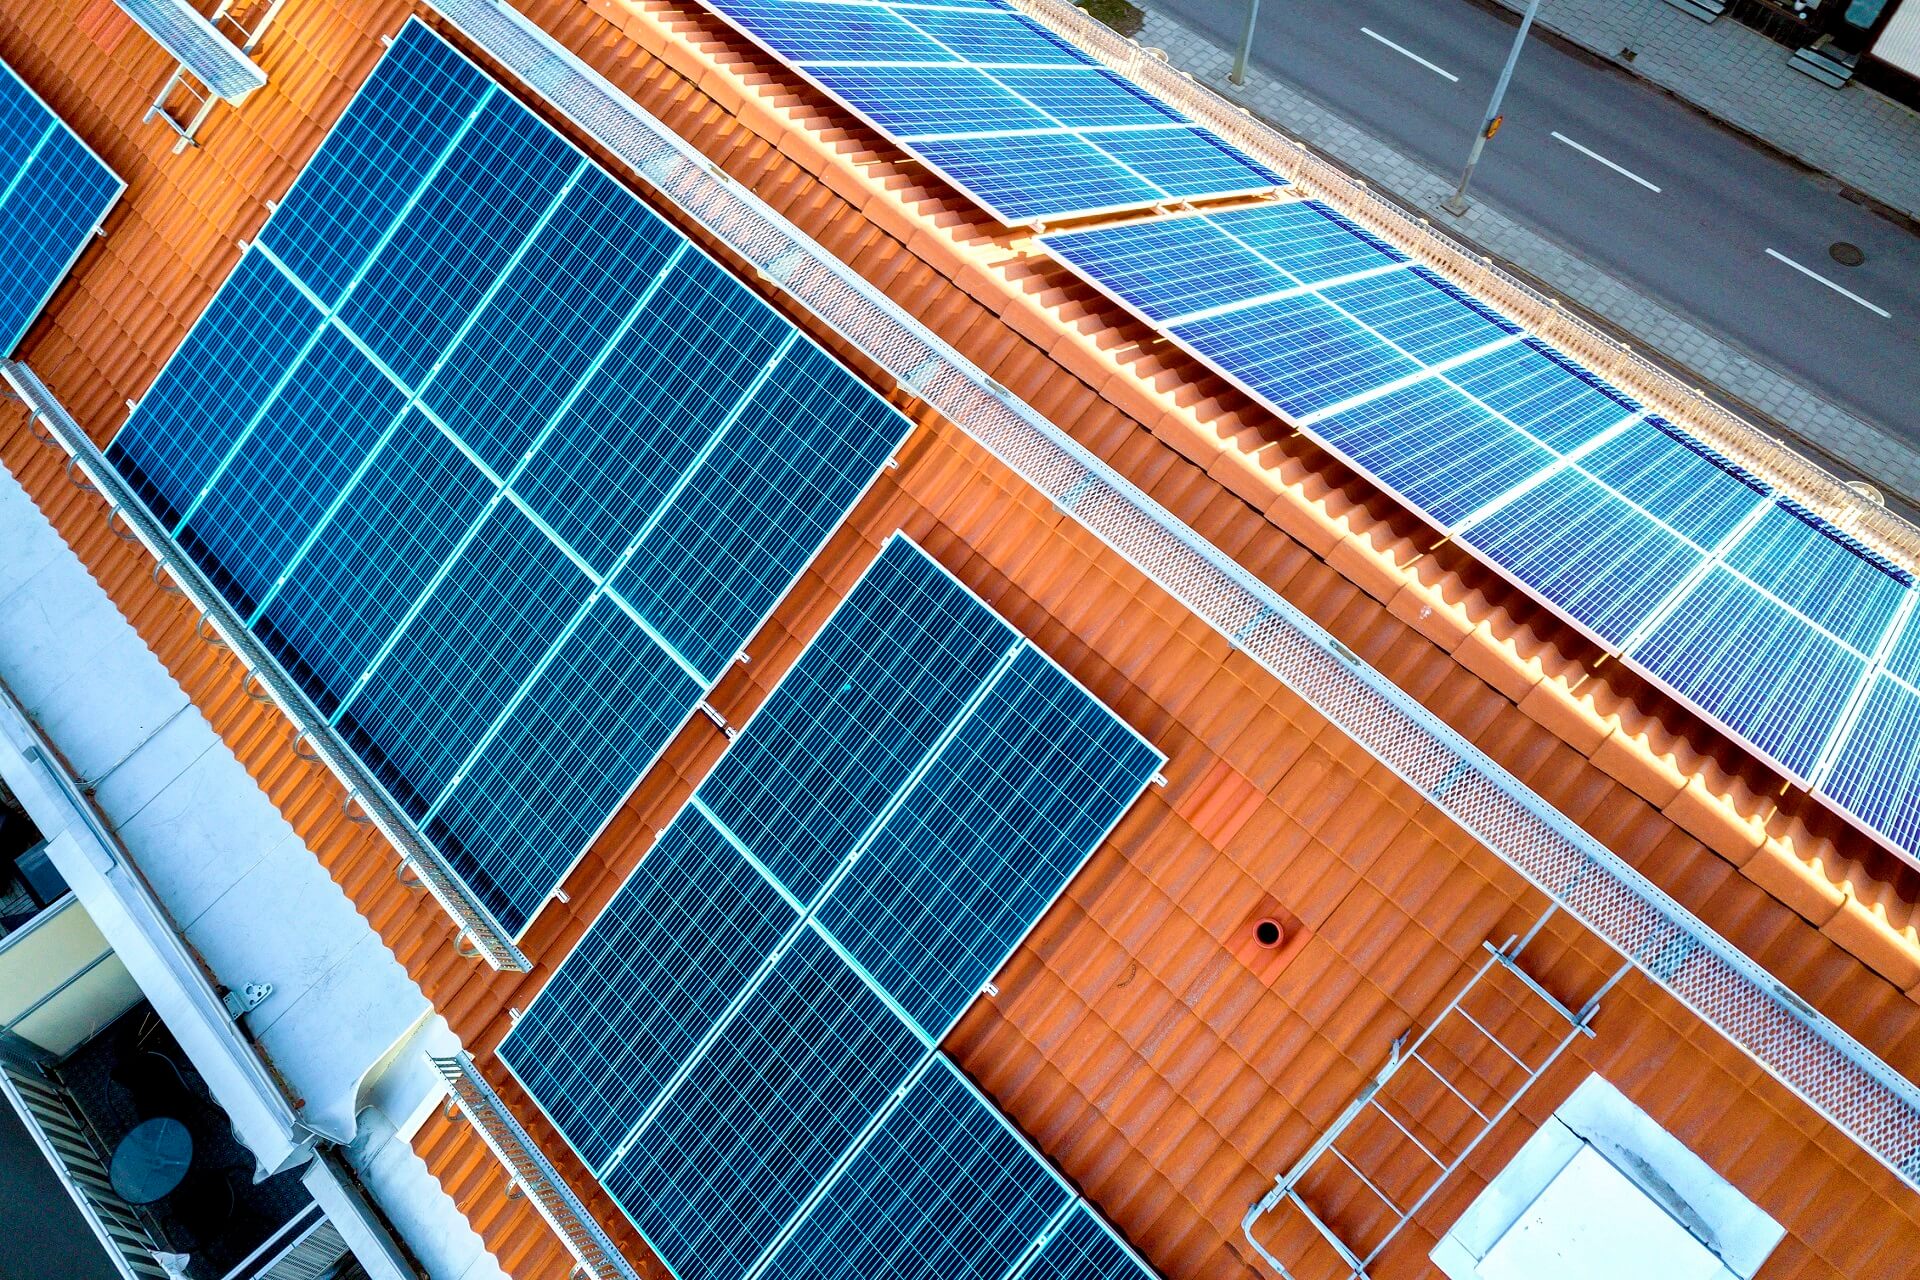 Photovoltaic cells and solar panels – what are the differences?